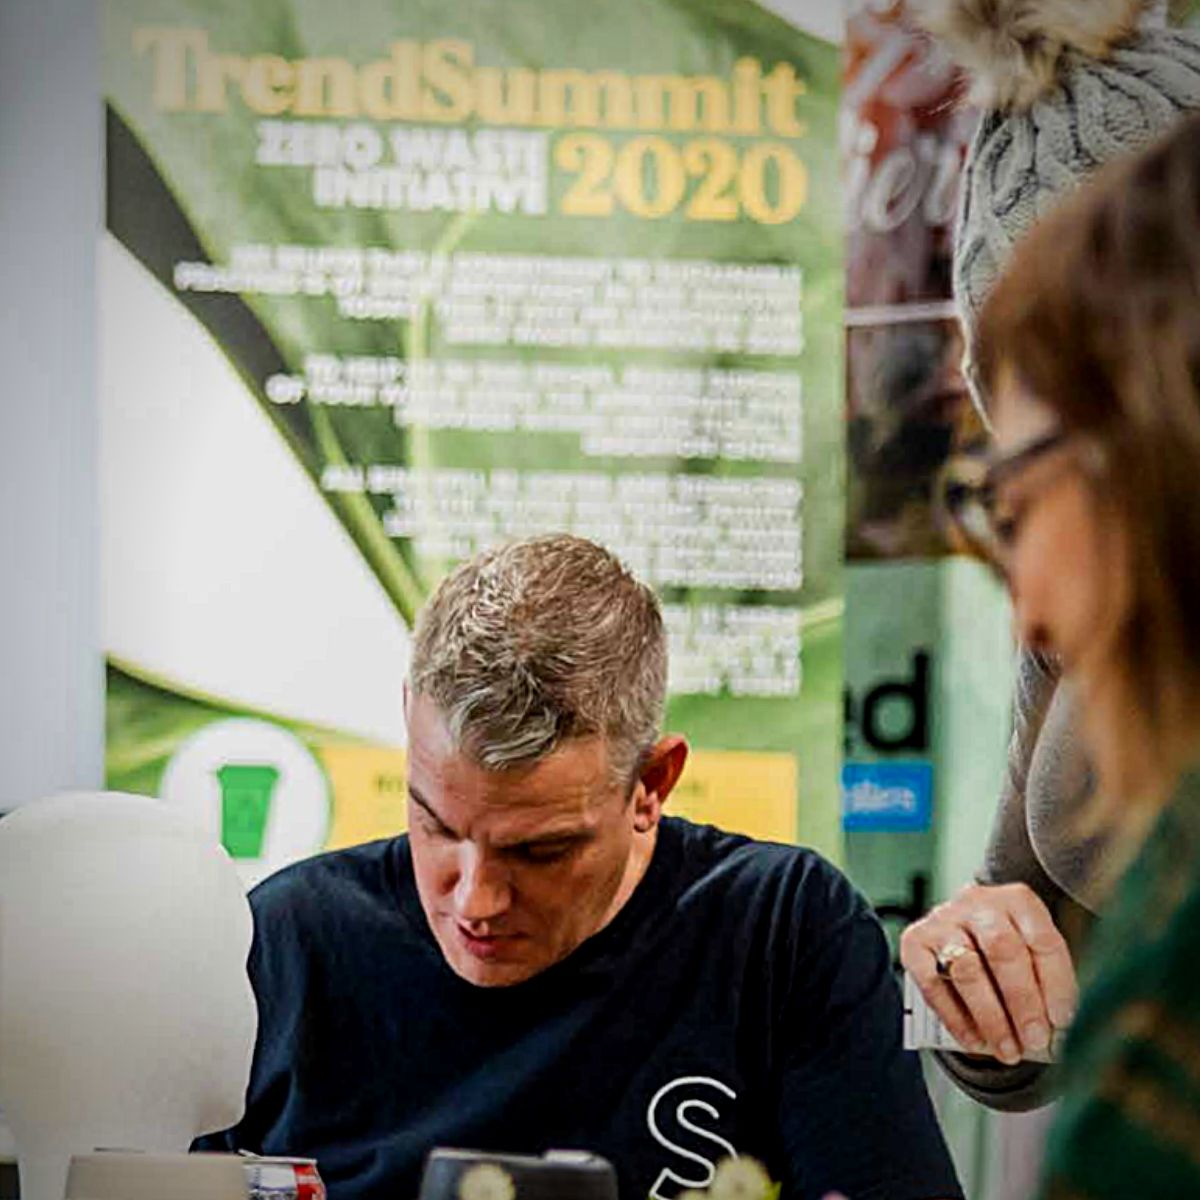 trend-summit-2020-report-featured